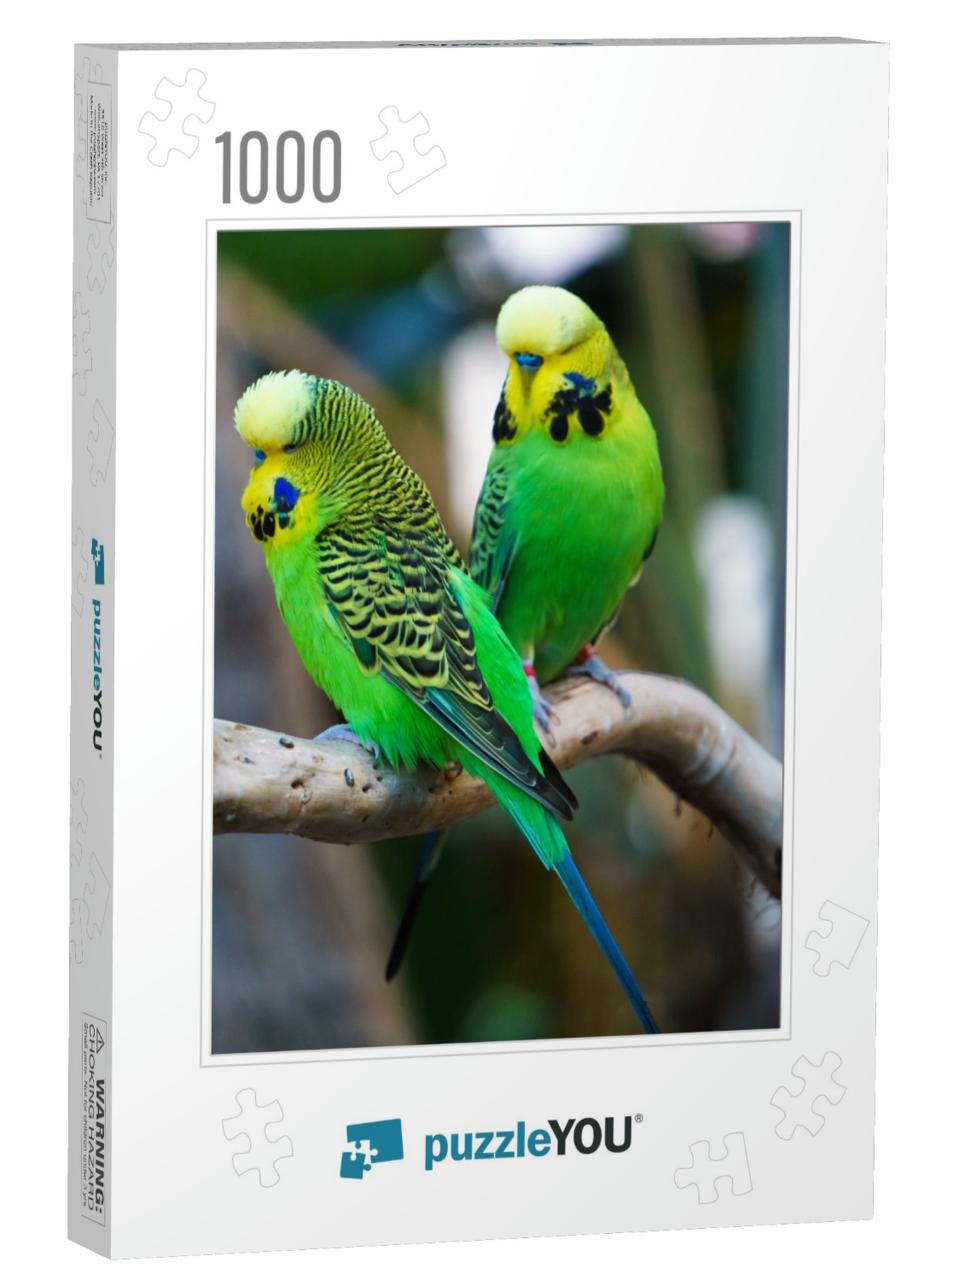 Two Budgerigars Parrot Birds Nicknamed the Budgie or the... Jigsaw Puzzle with 1000 pieces